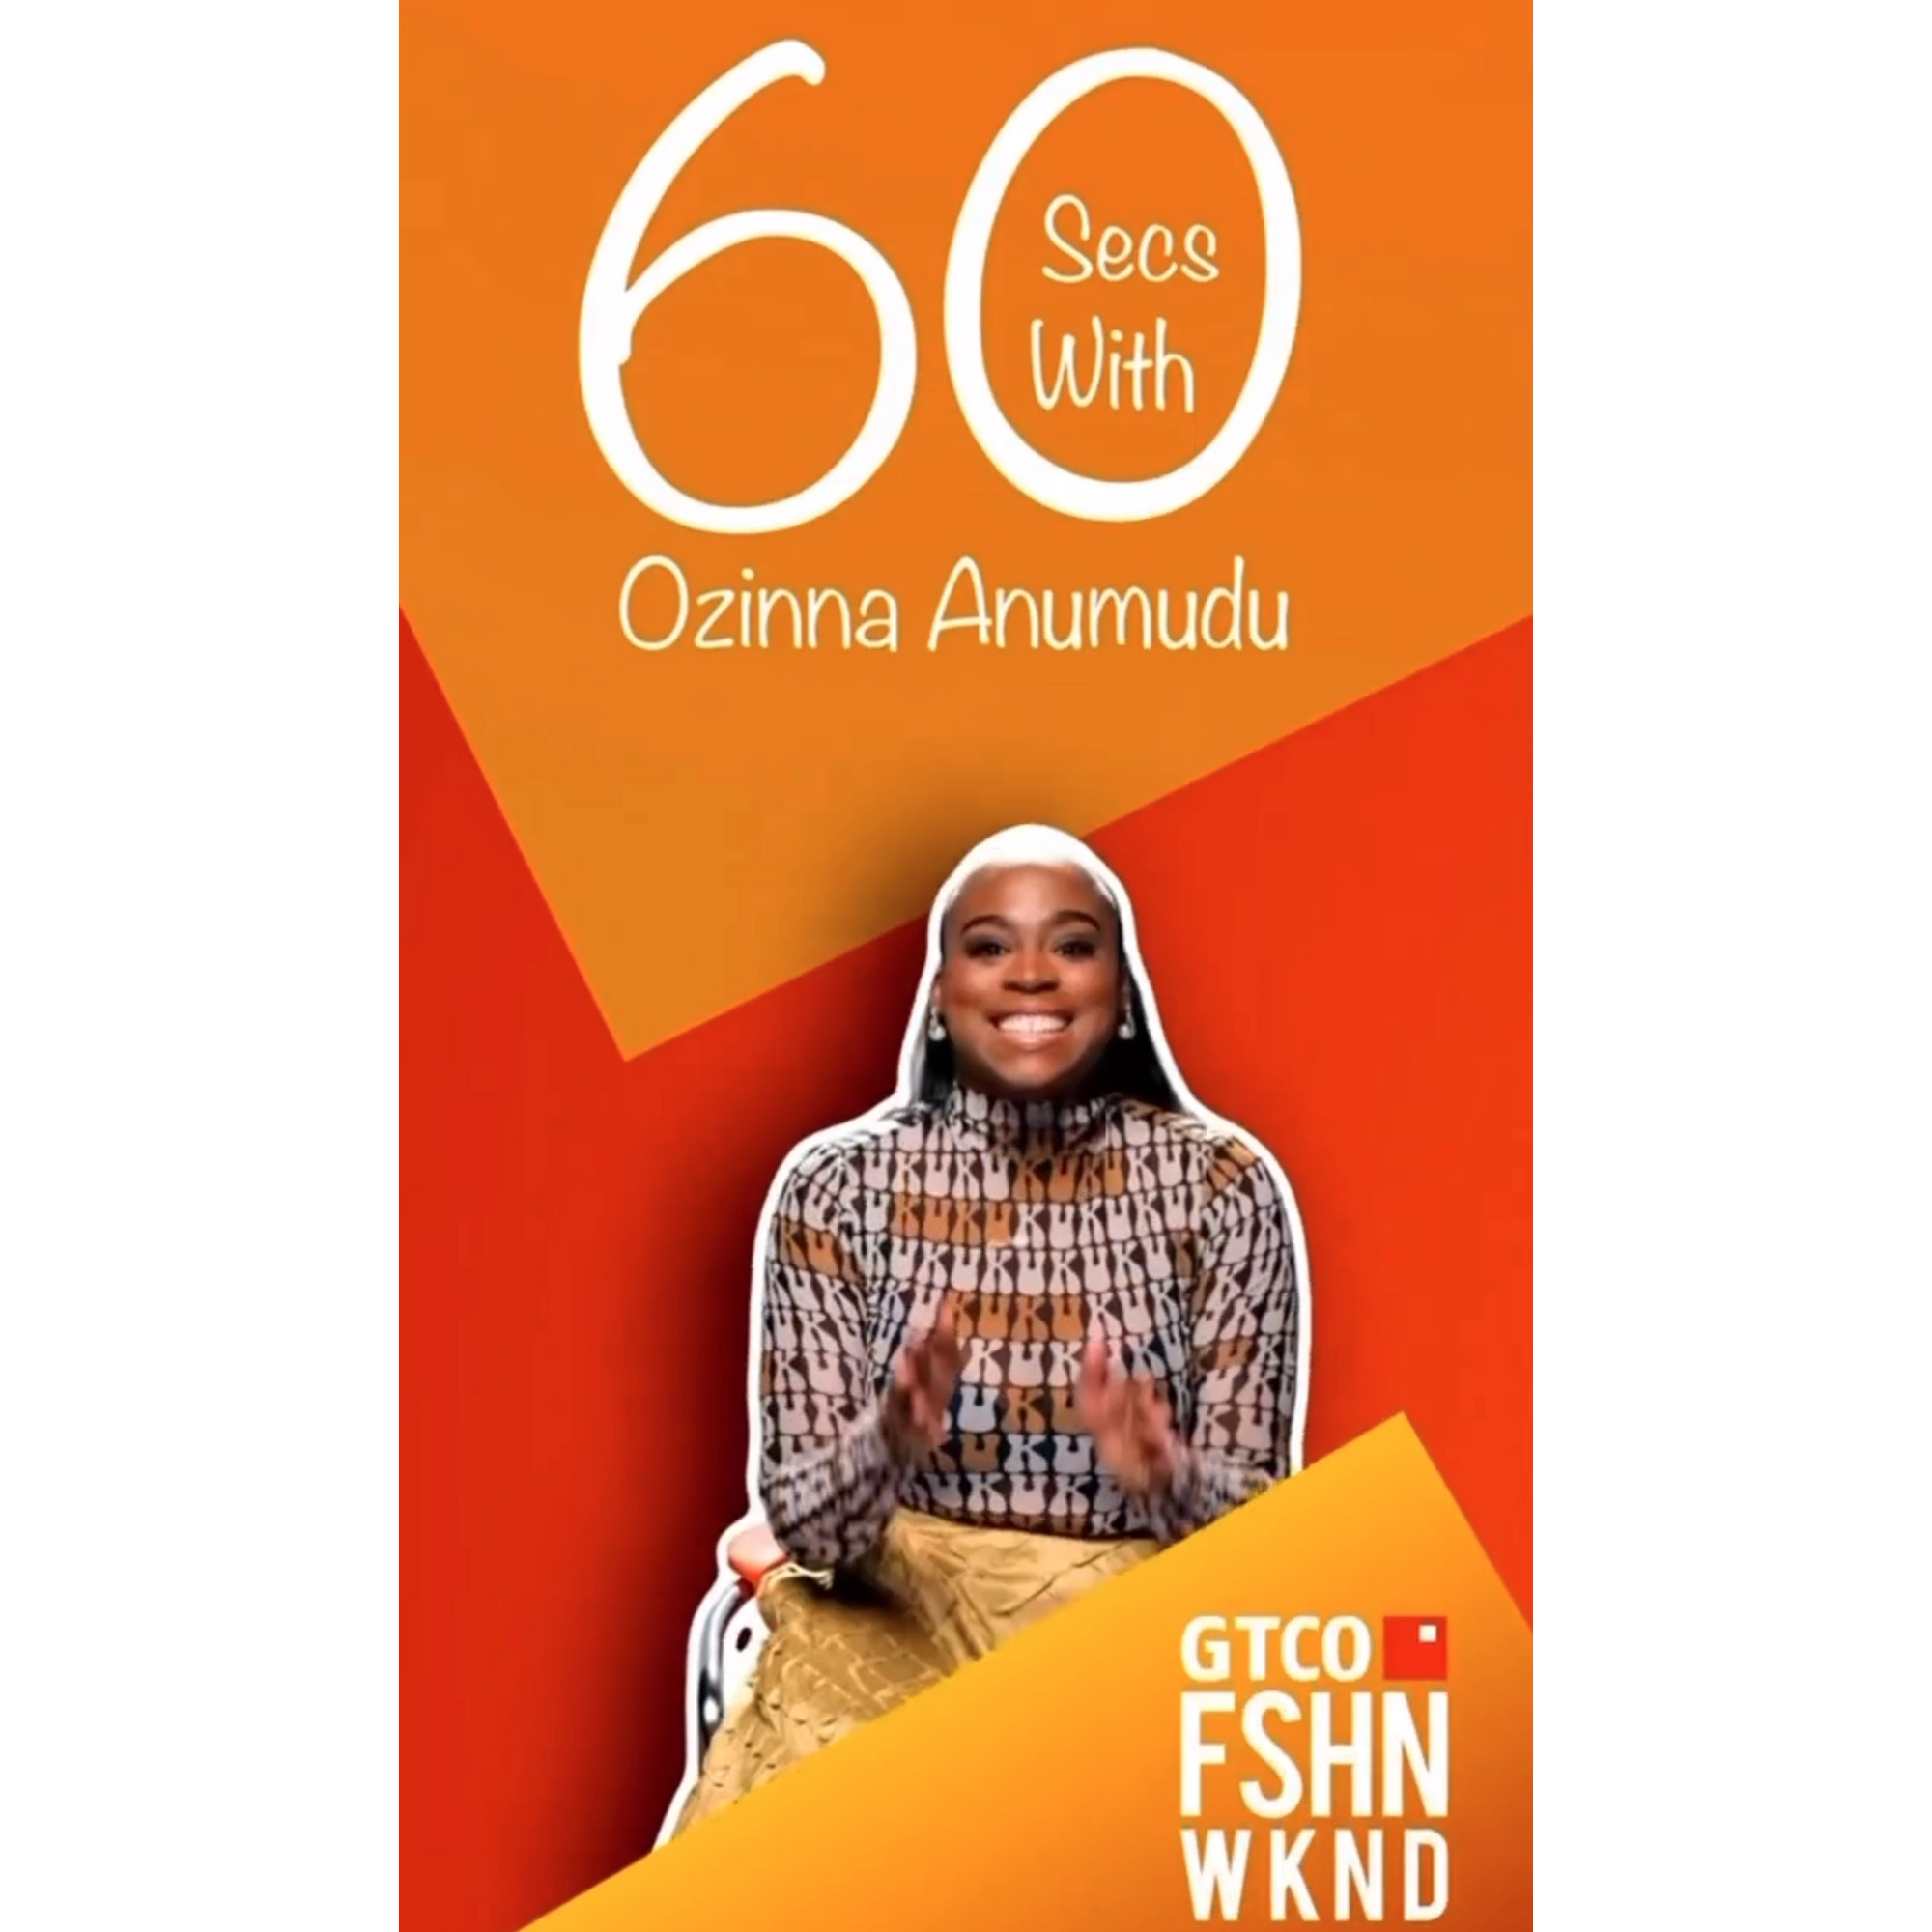 Get to know the queen promoter of Nigerian fashion in 60 seconds.